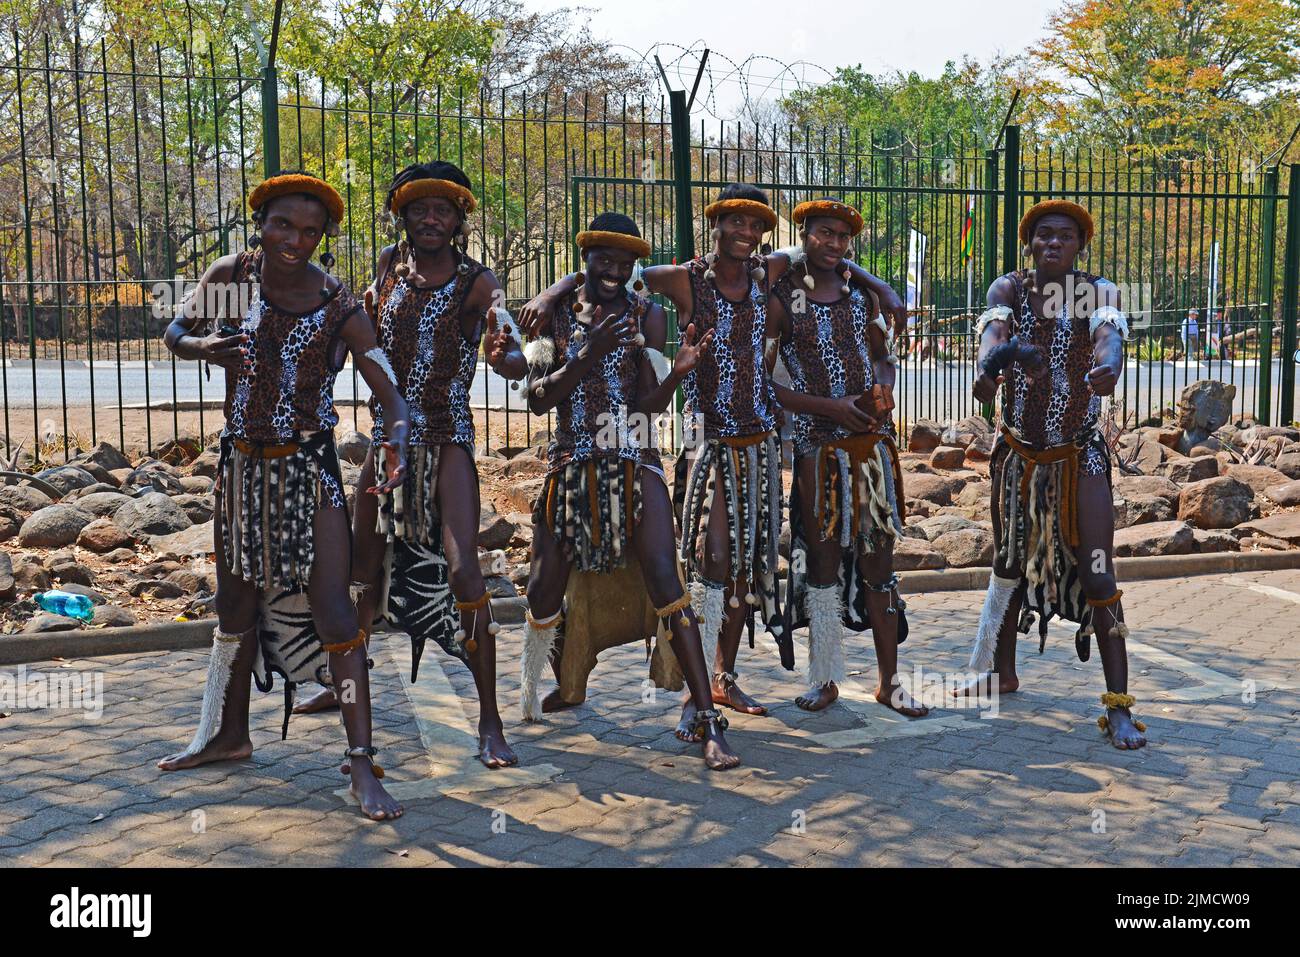 Traditional african dance group, zambia Stock Photo